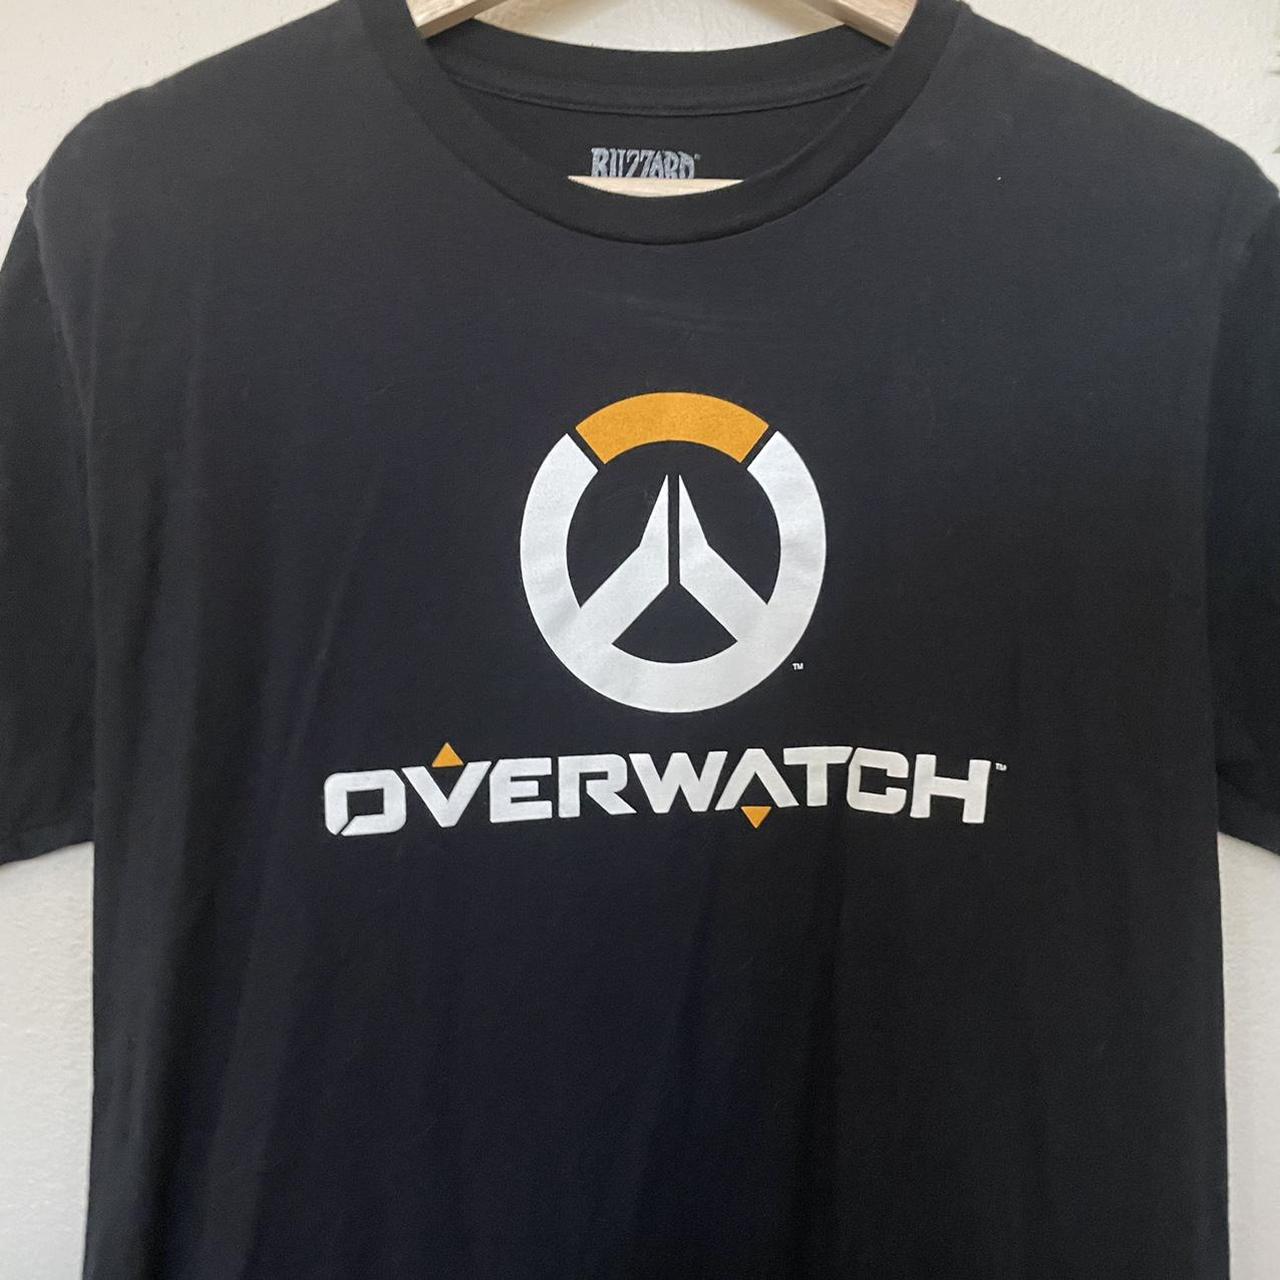 Product Image 3 - Black Overwatch Shirt

💀 Defects &